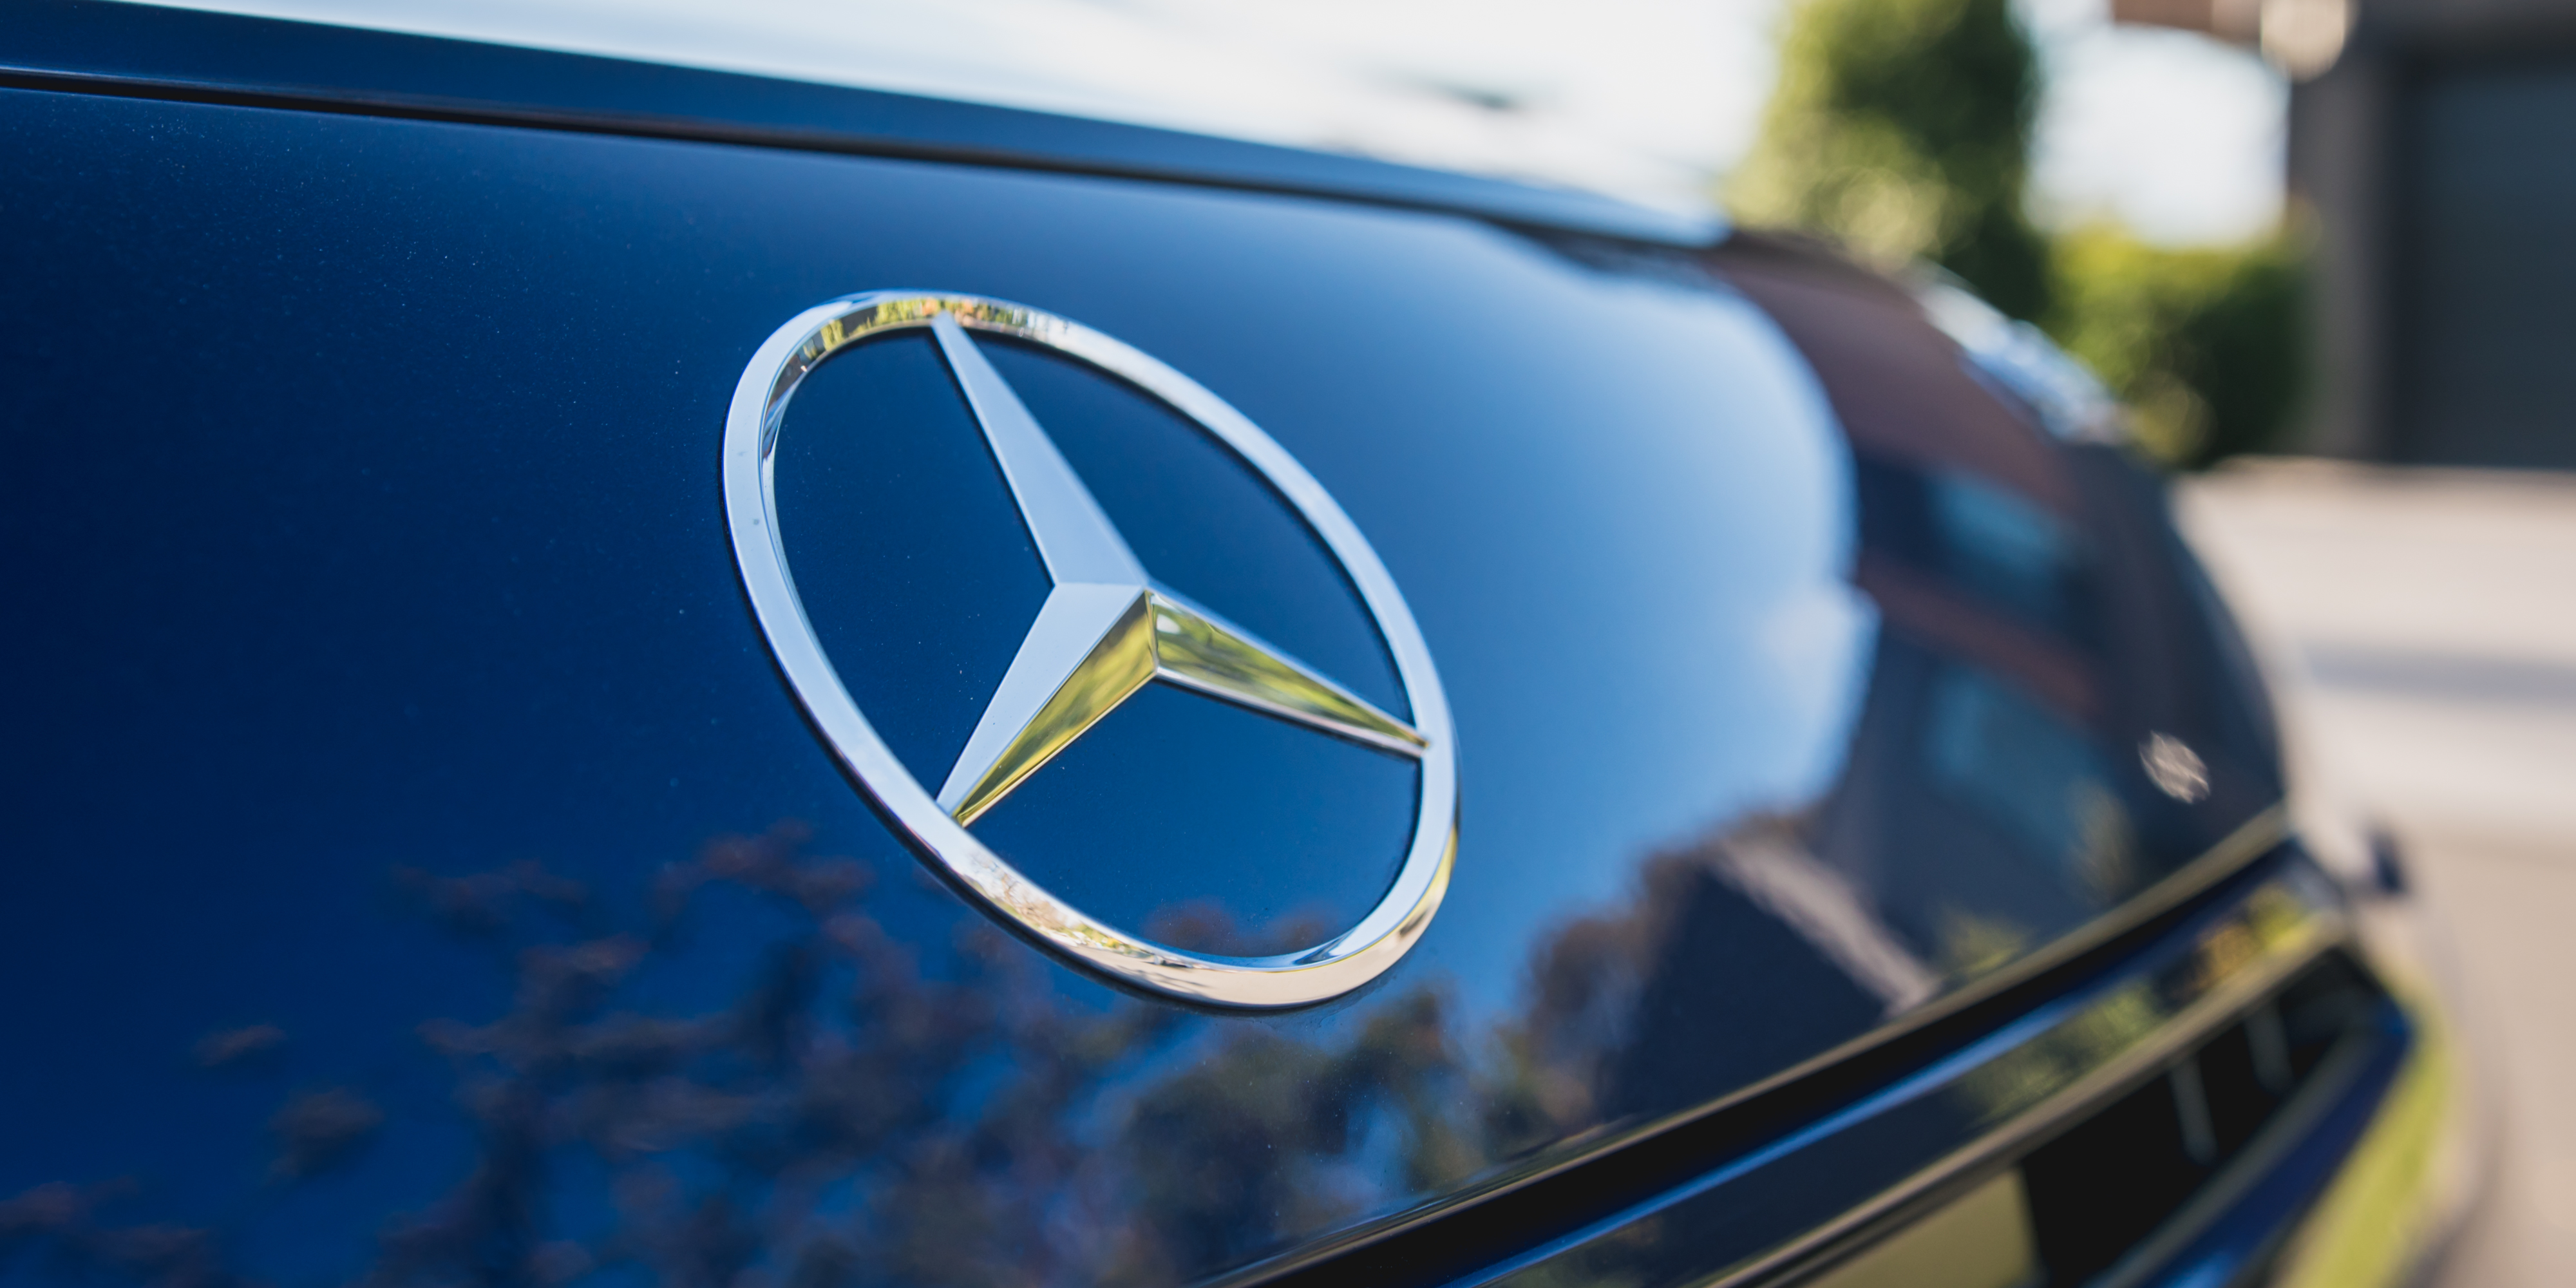 Mercedes Benz Recalls Several Models For Faulty Airbags Caradvice